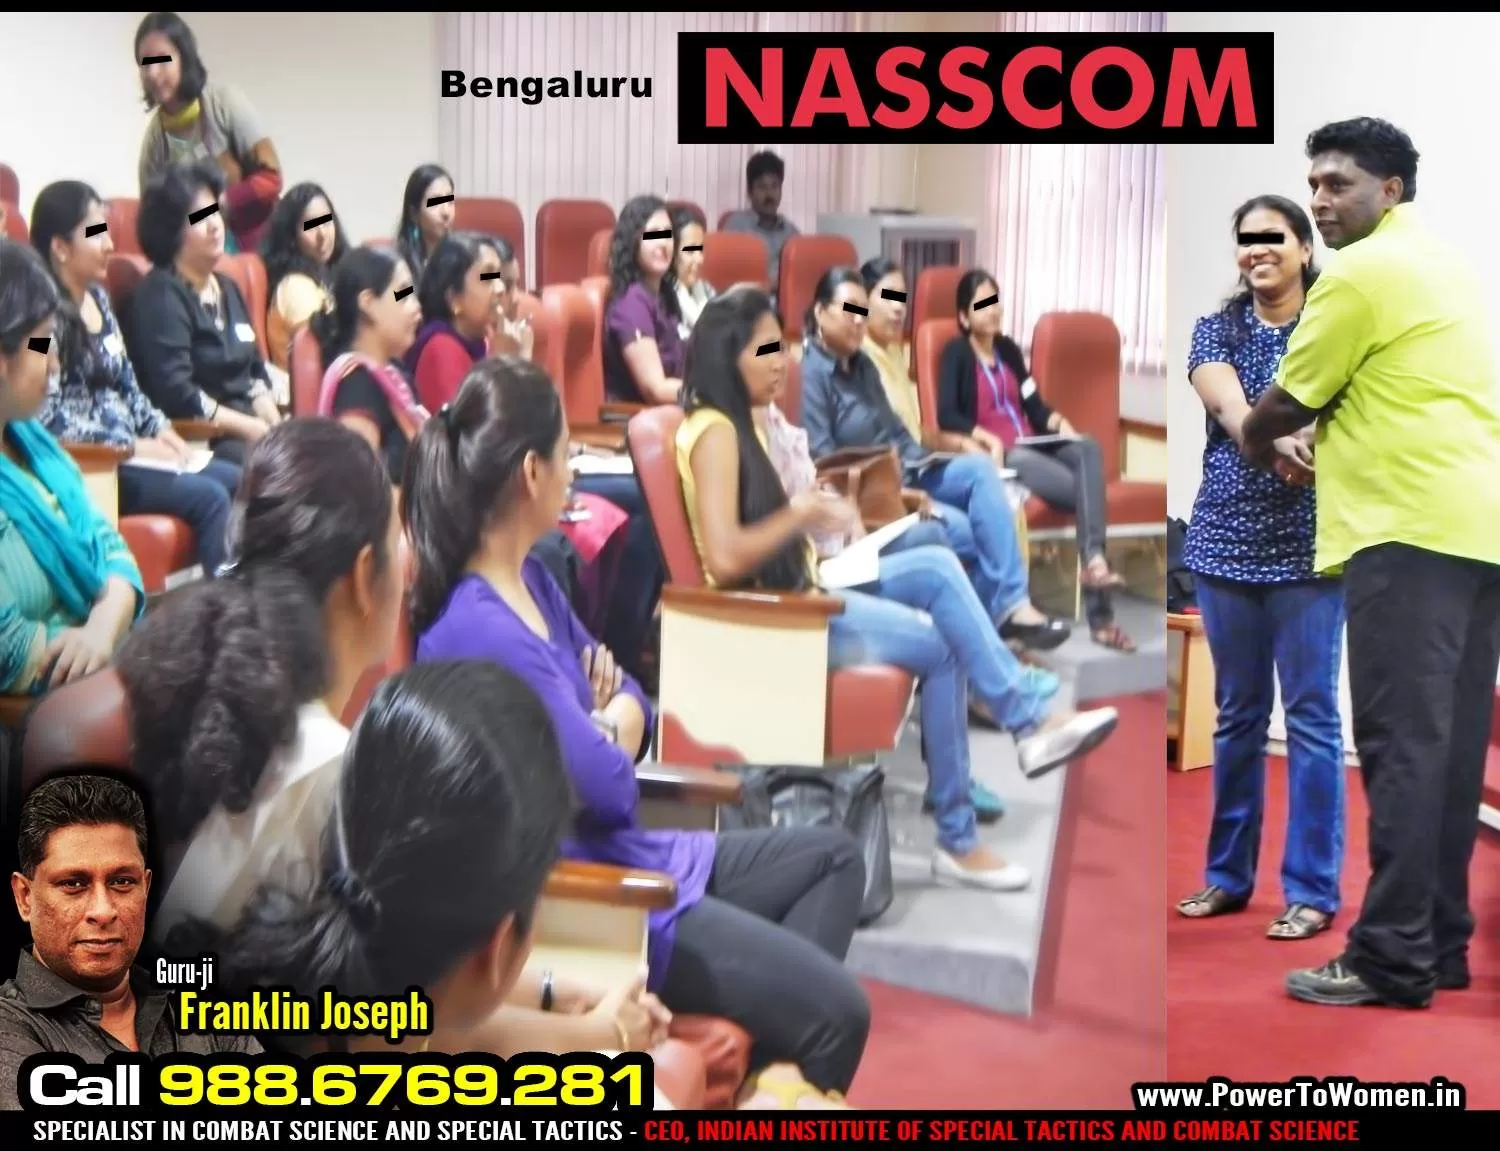 Power To Women Self Defense in NASSCOM conducted by Specialist Franklin Joseph